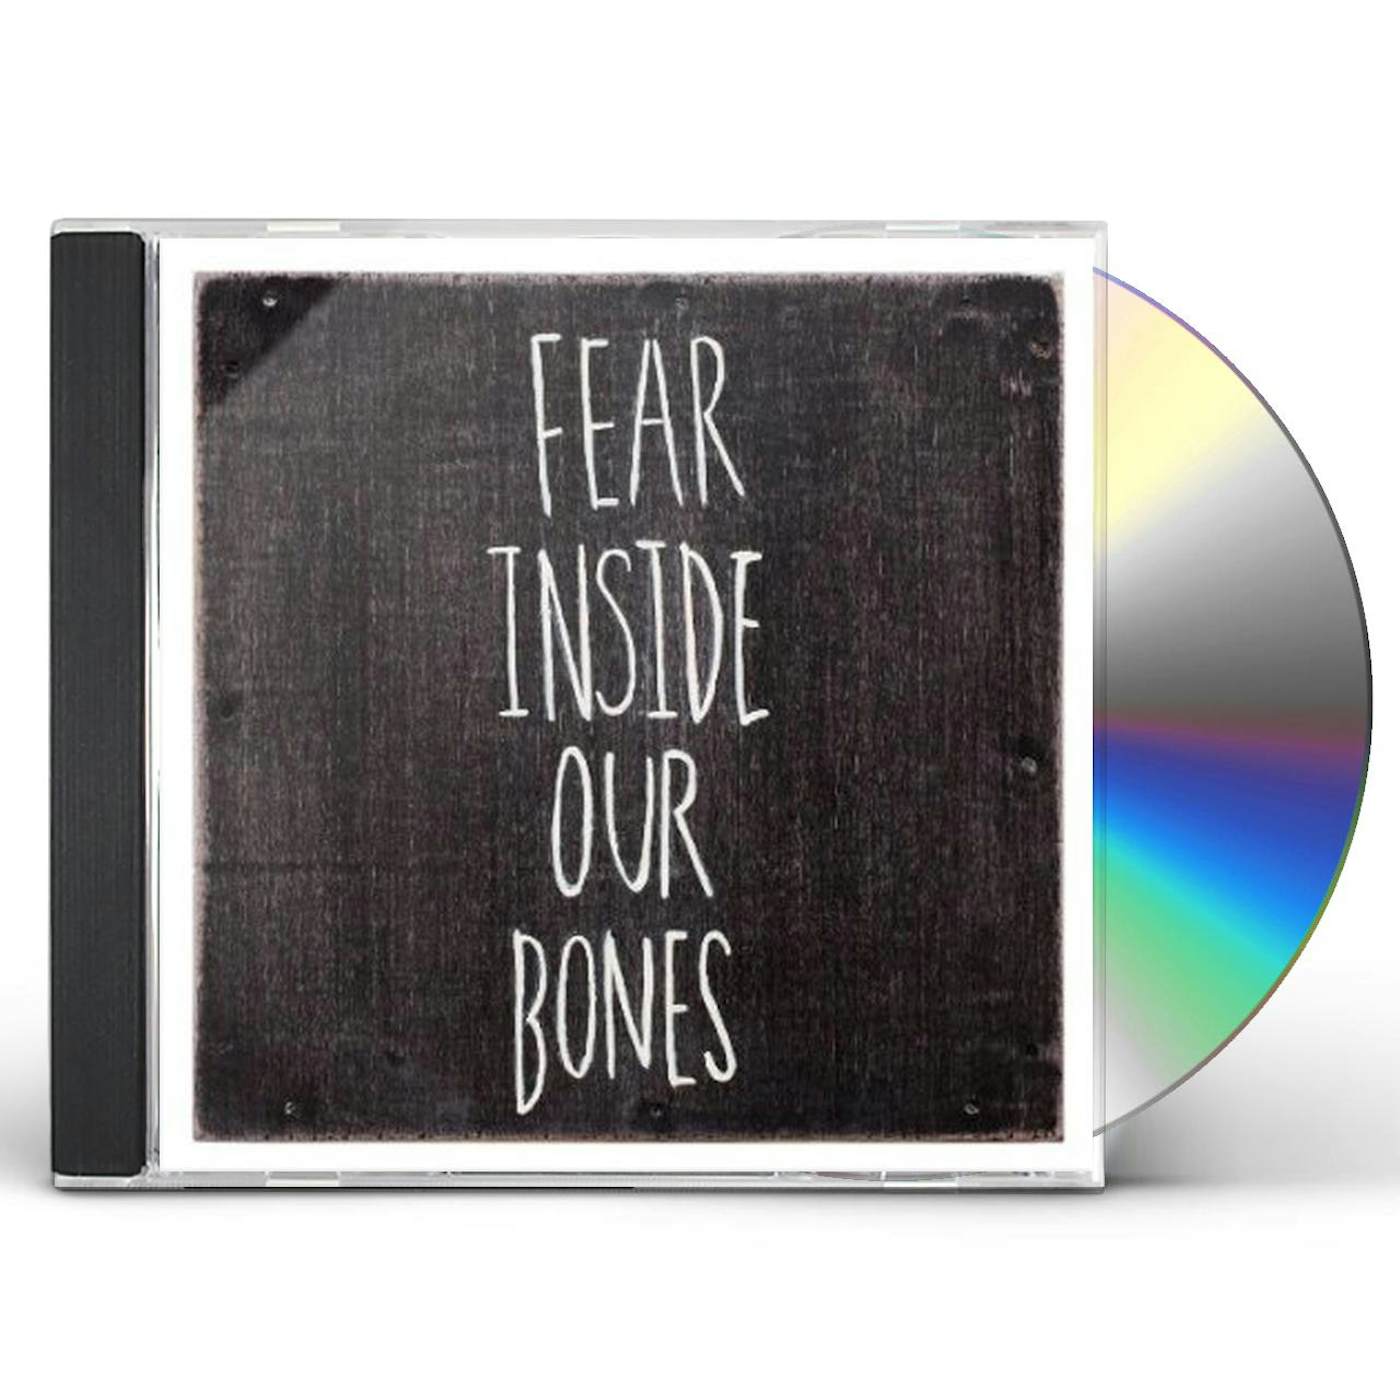 Almost FEAR INSIDE OUR BONES CD